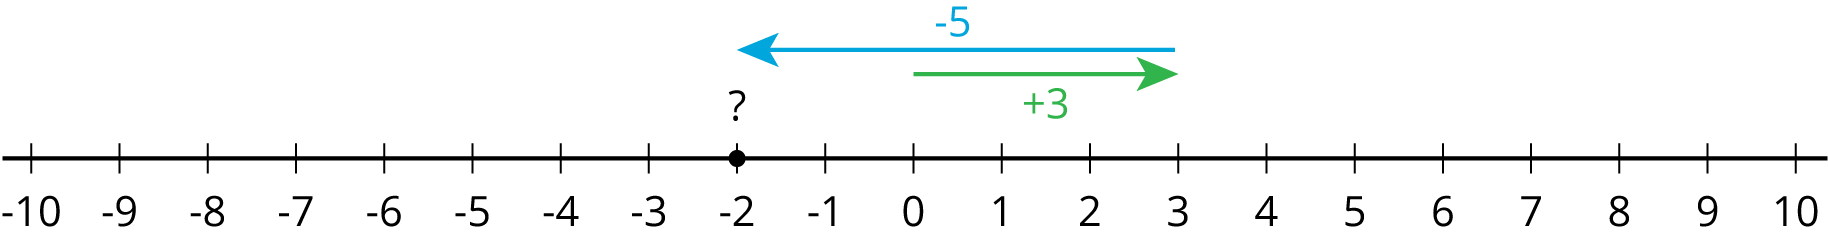 A number line with the numbers negative 10 through 10 indicated. An arrow starts at 0, points to the right, ends at 3, and is labeled "plus 3". A second arrow starts at 3, points to the left, ends at negative two, and is labeled "minus 5". There is a solid dot and a question mark labeled at 2.